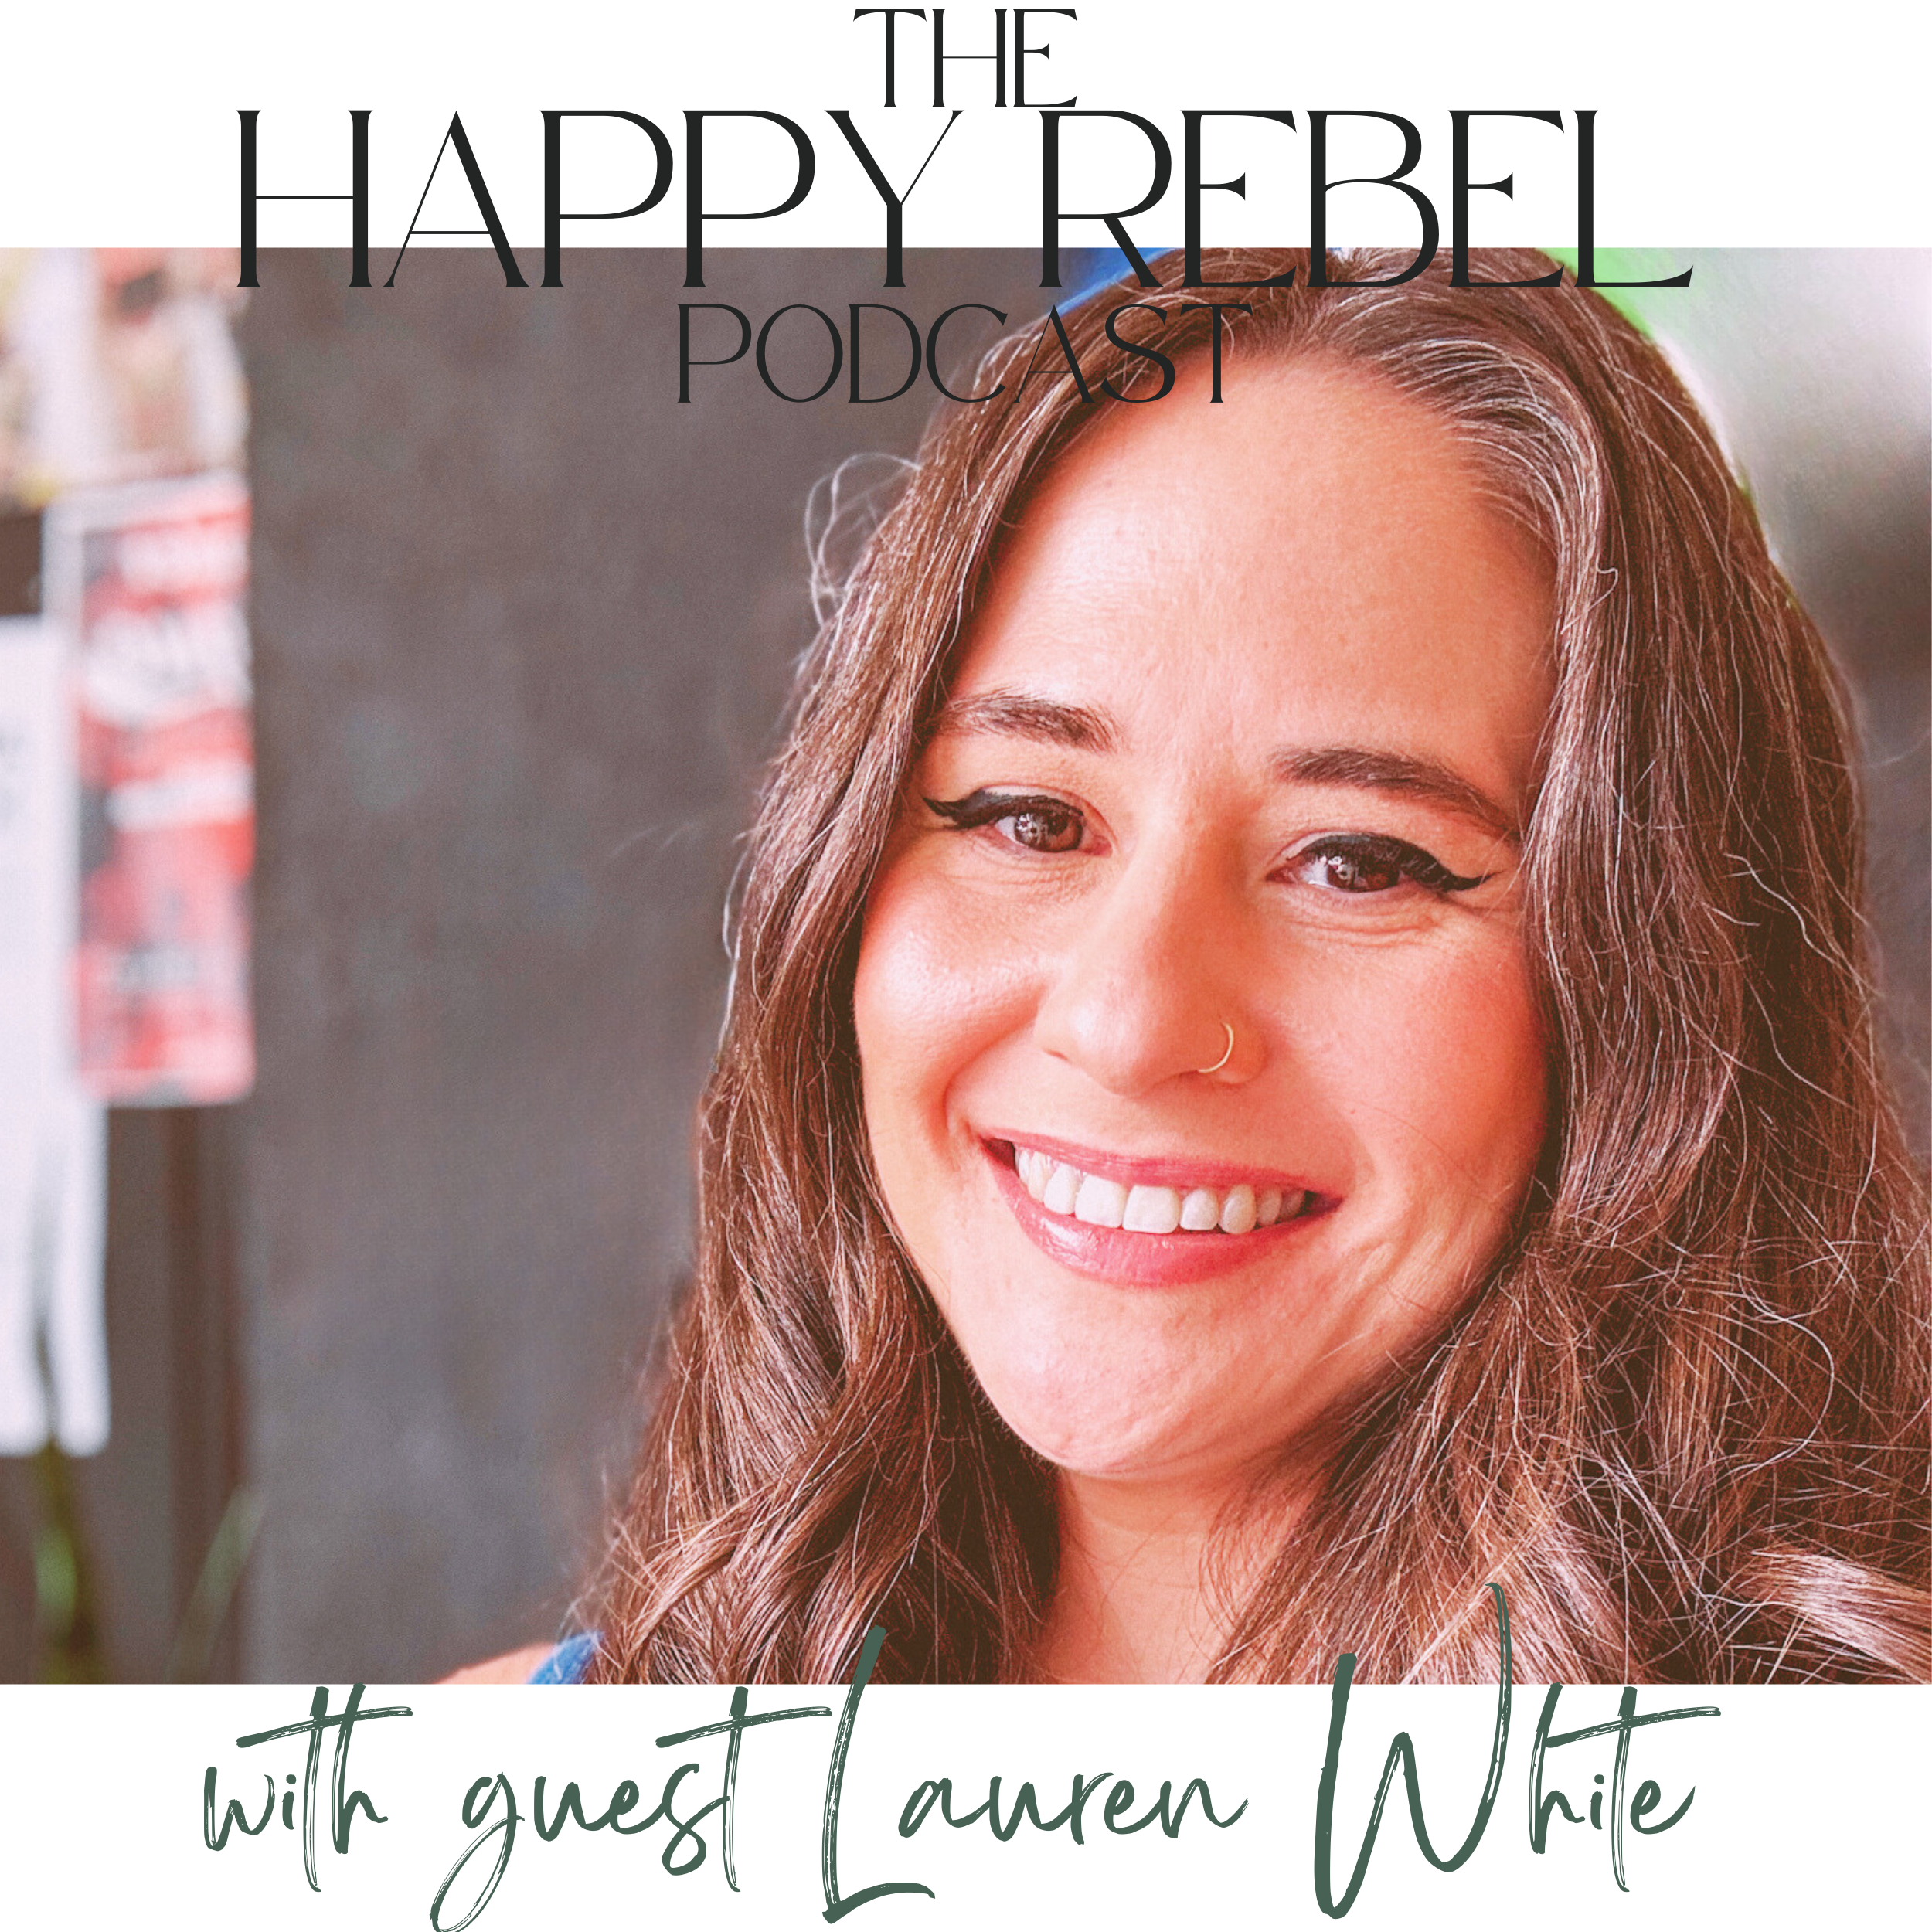 Episode 3: Lauren White on sustainable style, confidence, and living authentically.